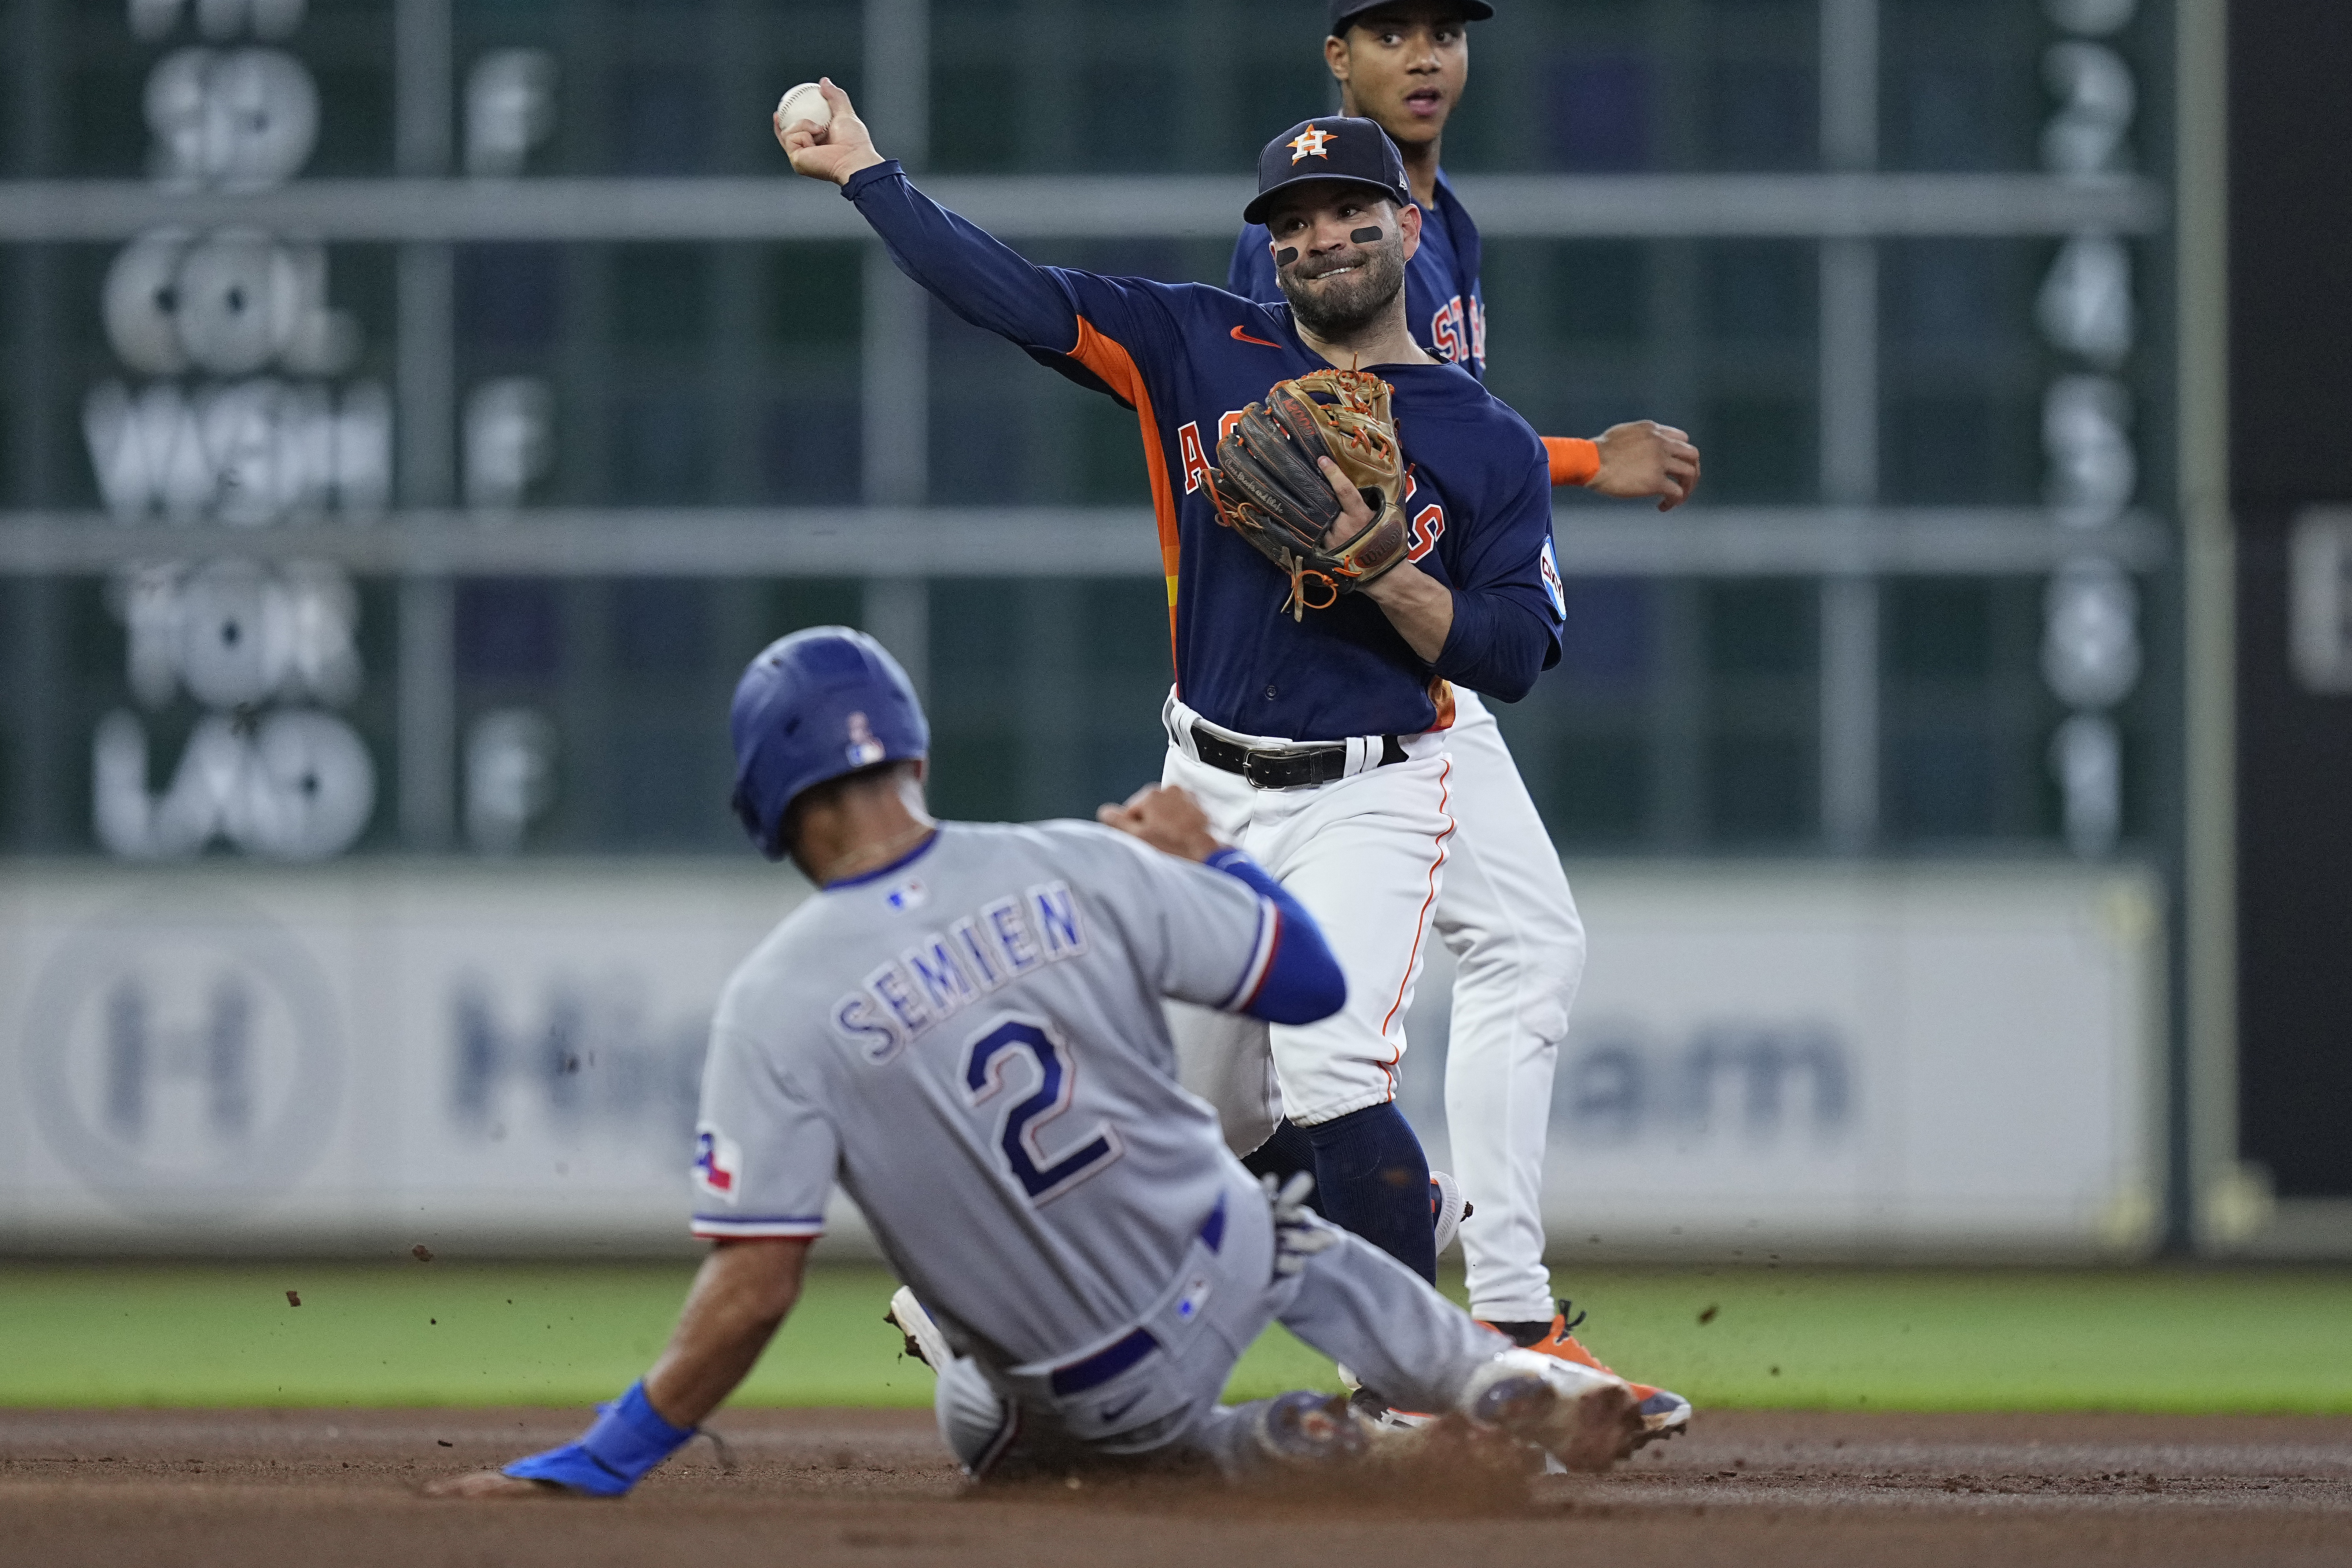 AL West-leading Texas Rangers are hot and Astros have noticed